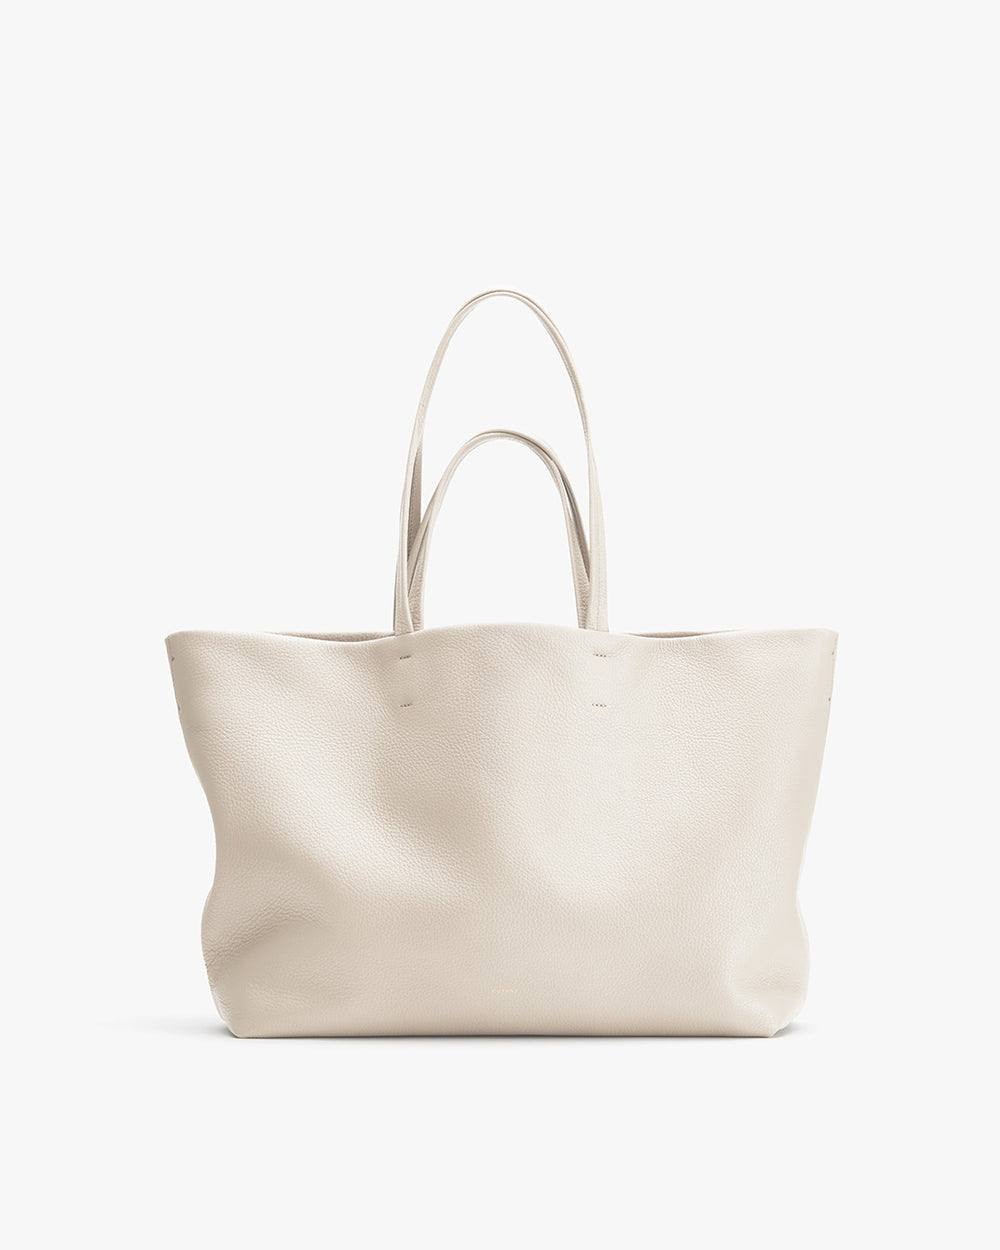 Plain tote bag standing upright against a solid background